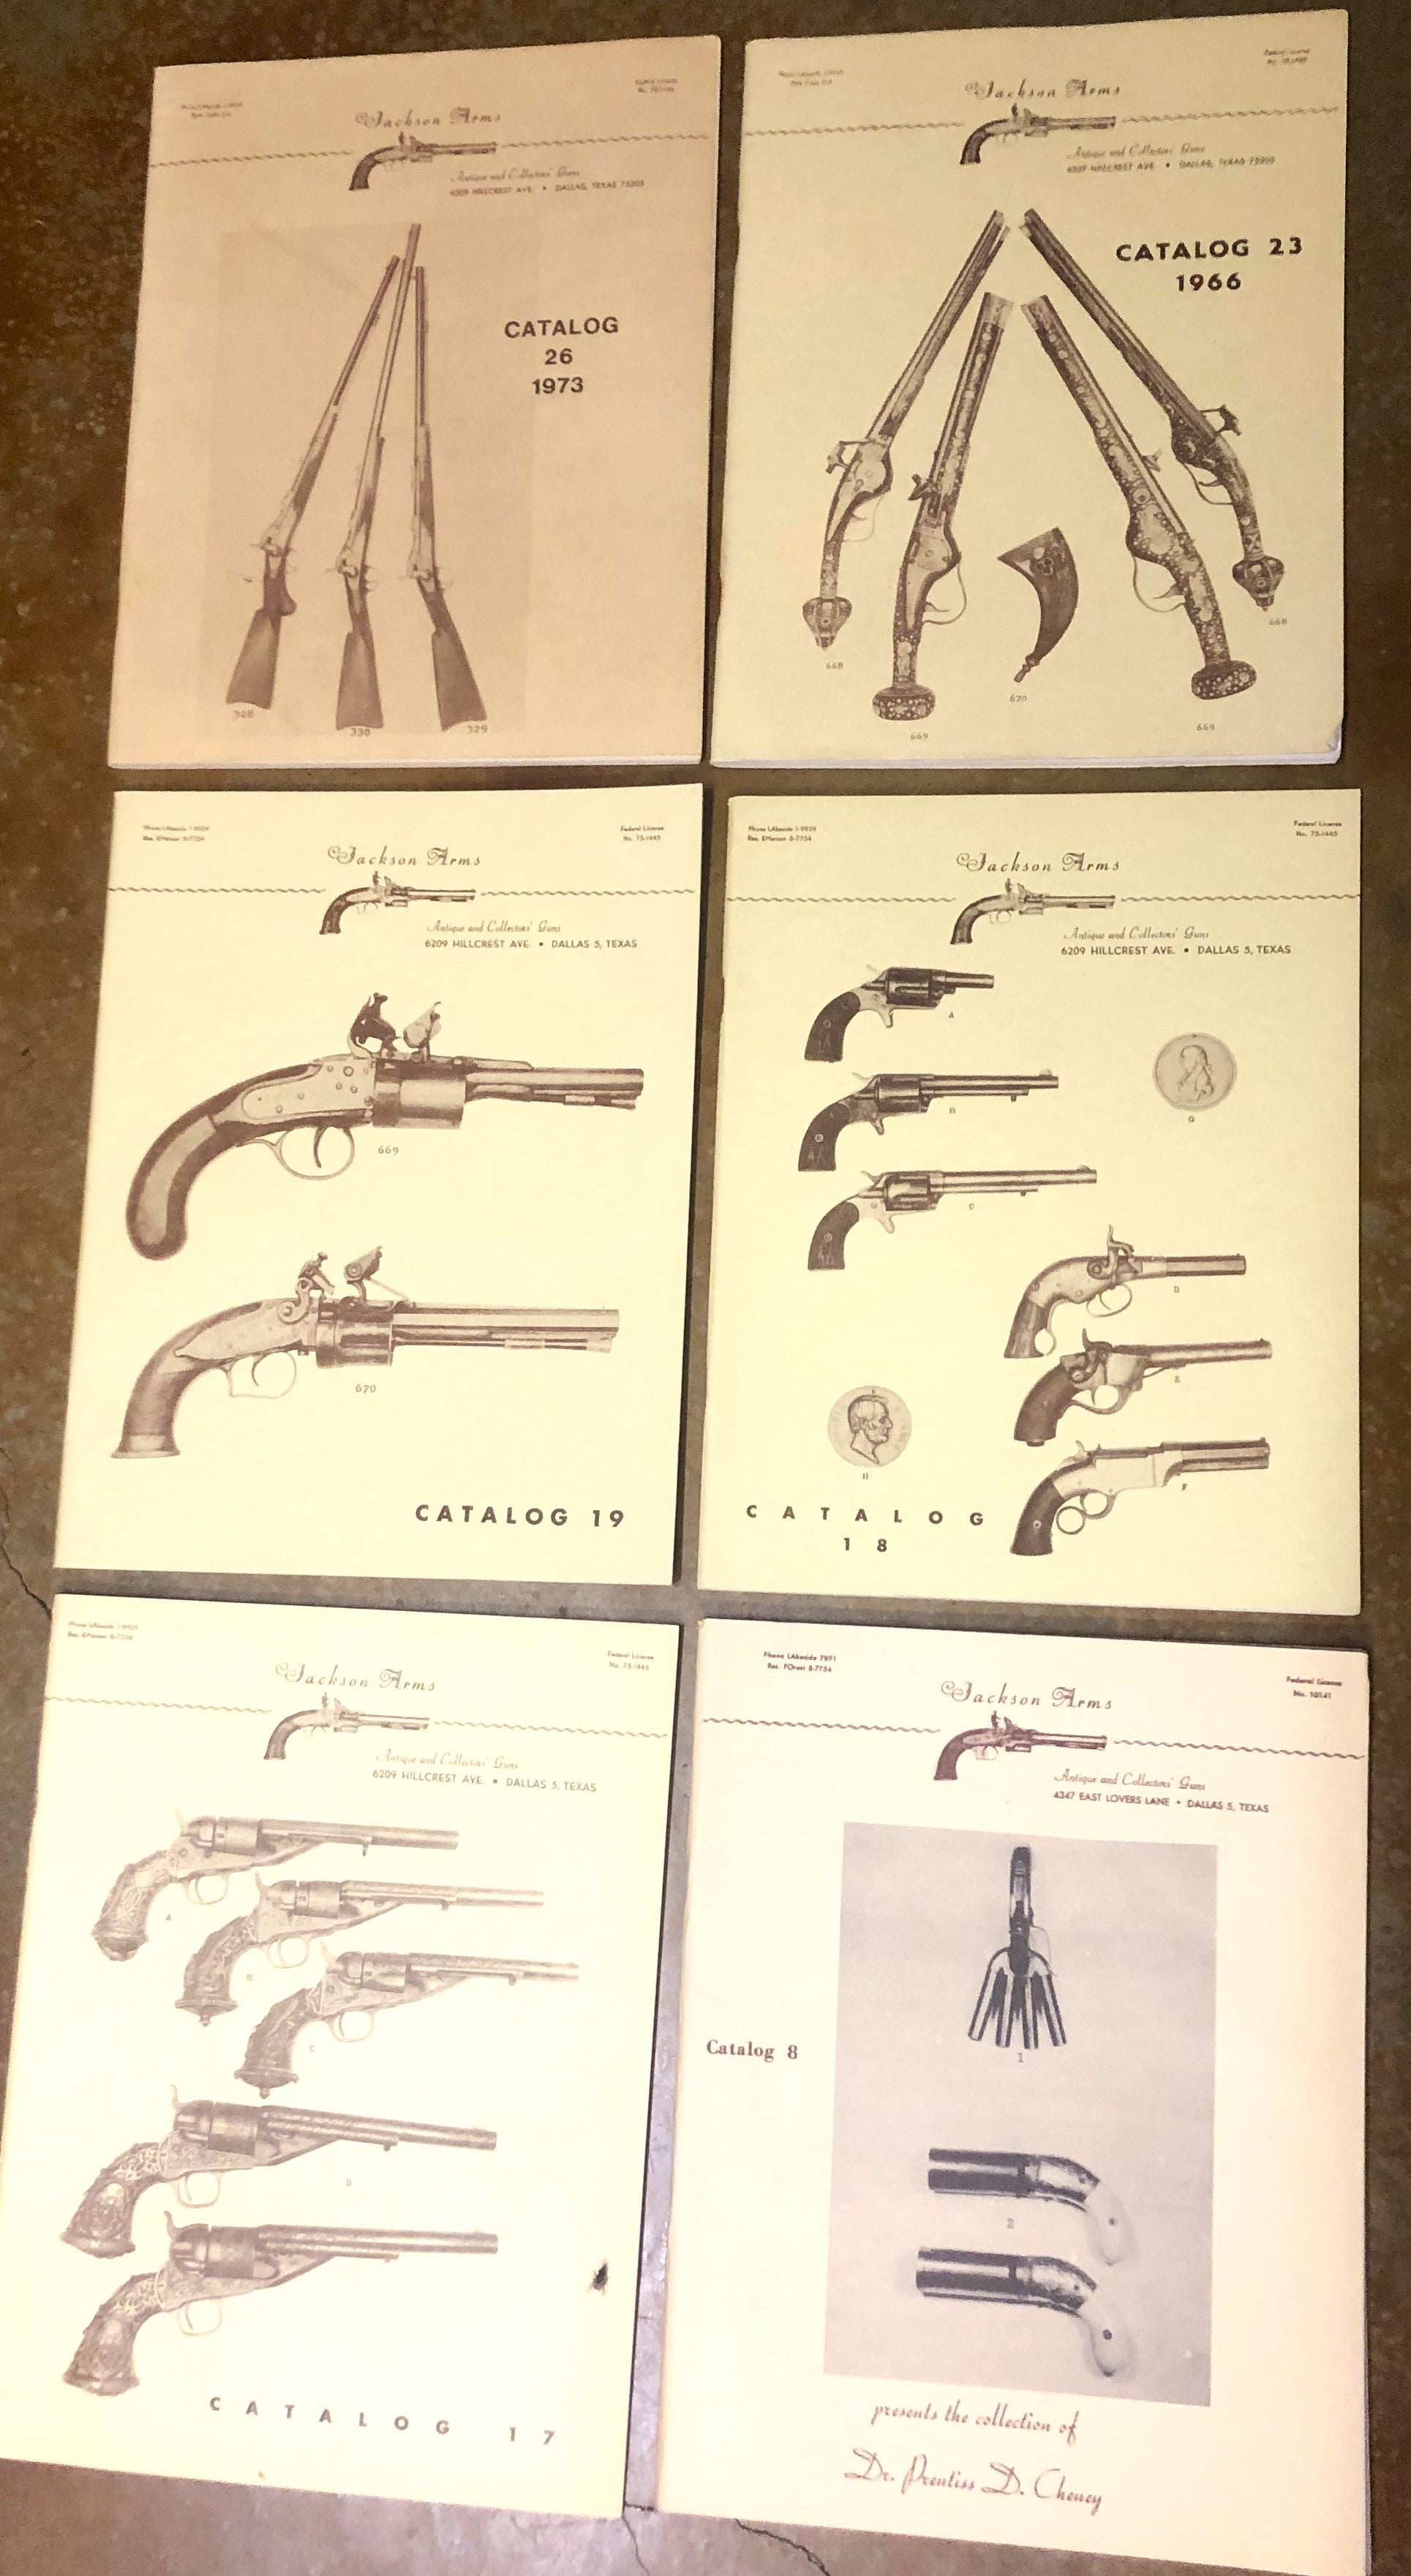 BOOKS - Jackson Arms - 6 Catalogs from 19?? to 1973